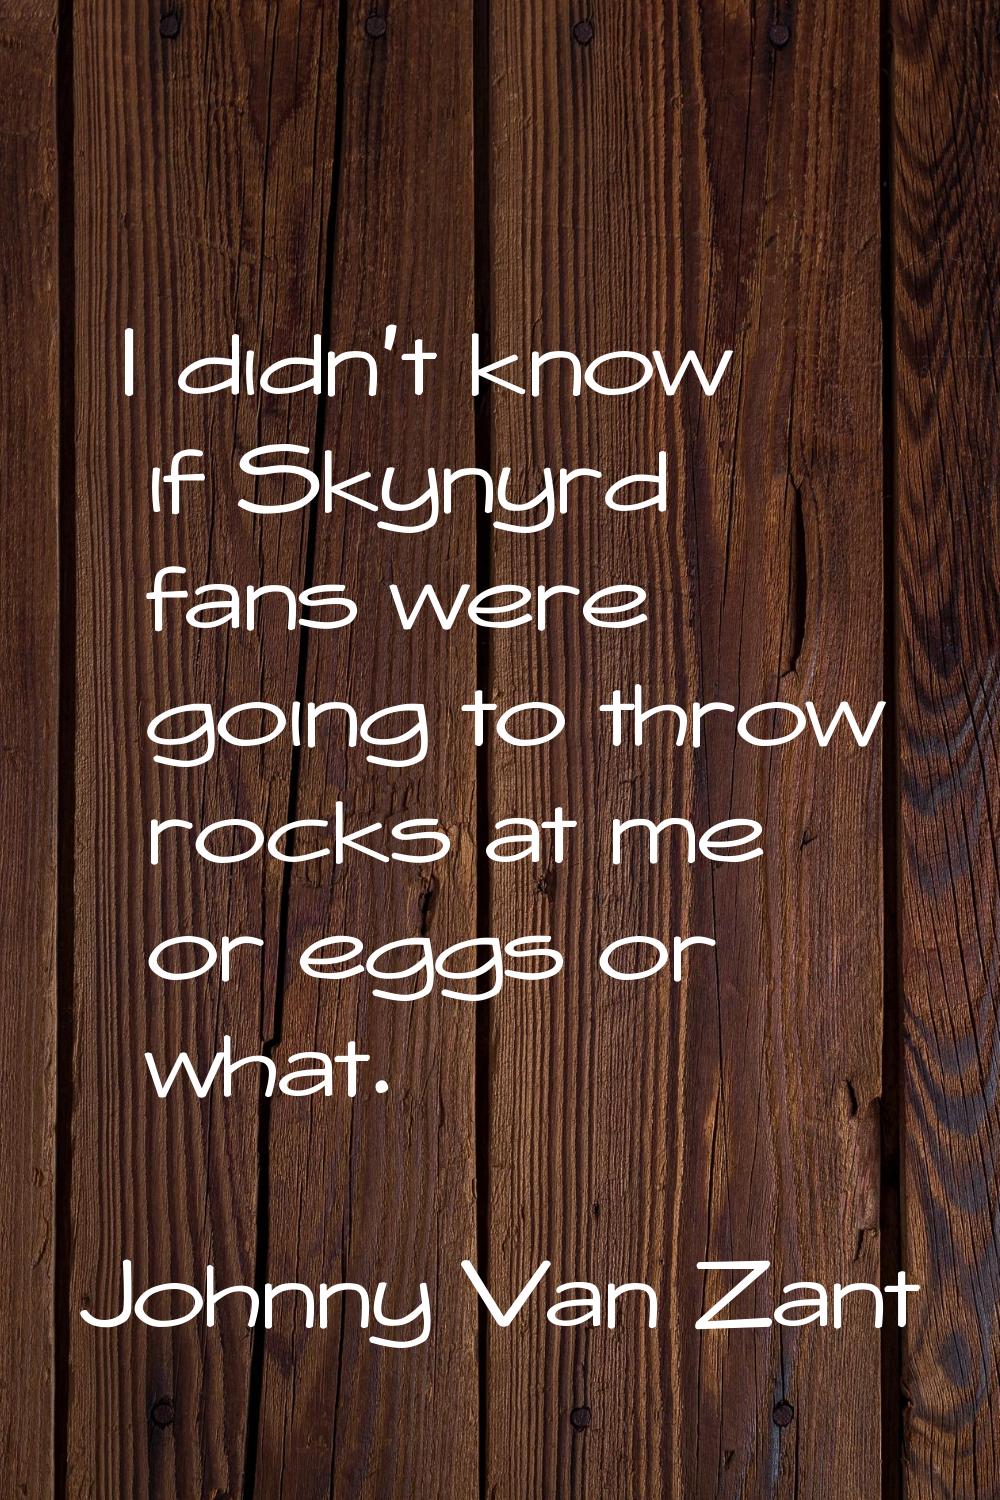 I didn't know if Skynyrd fans were going to throw rocks at me or eggs or what.